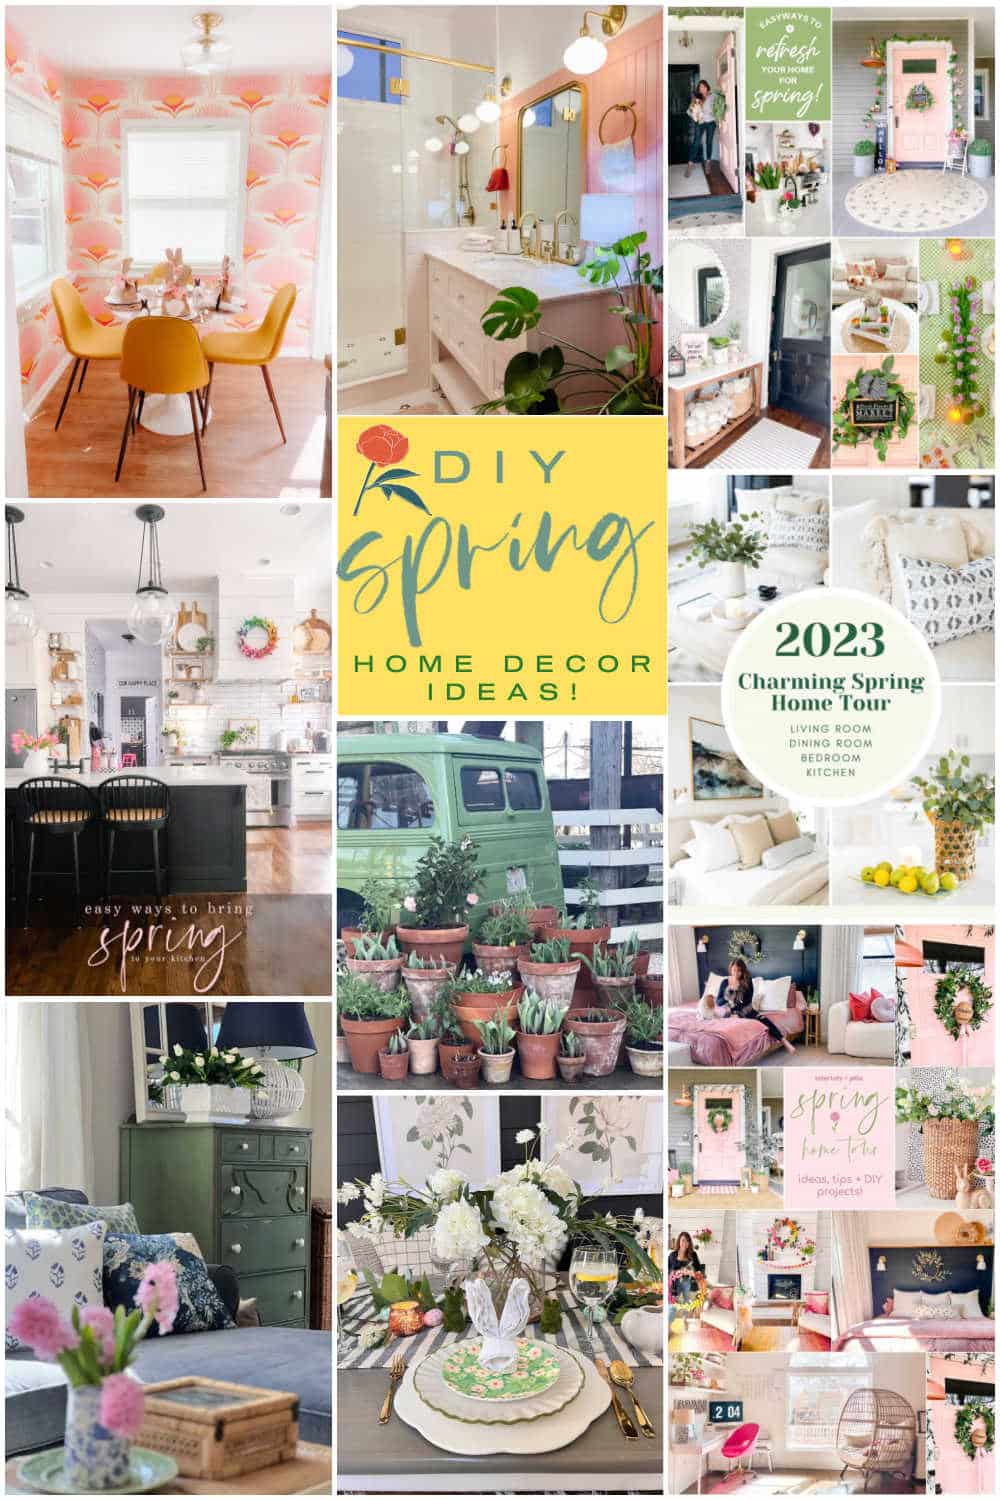 Spring Home Decor Ideas. Spruce up your home for Spring with these easy decor and DIY ideas!